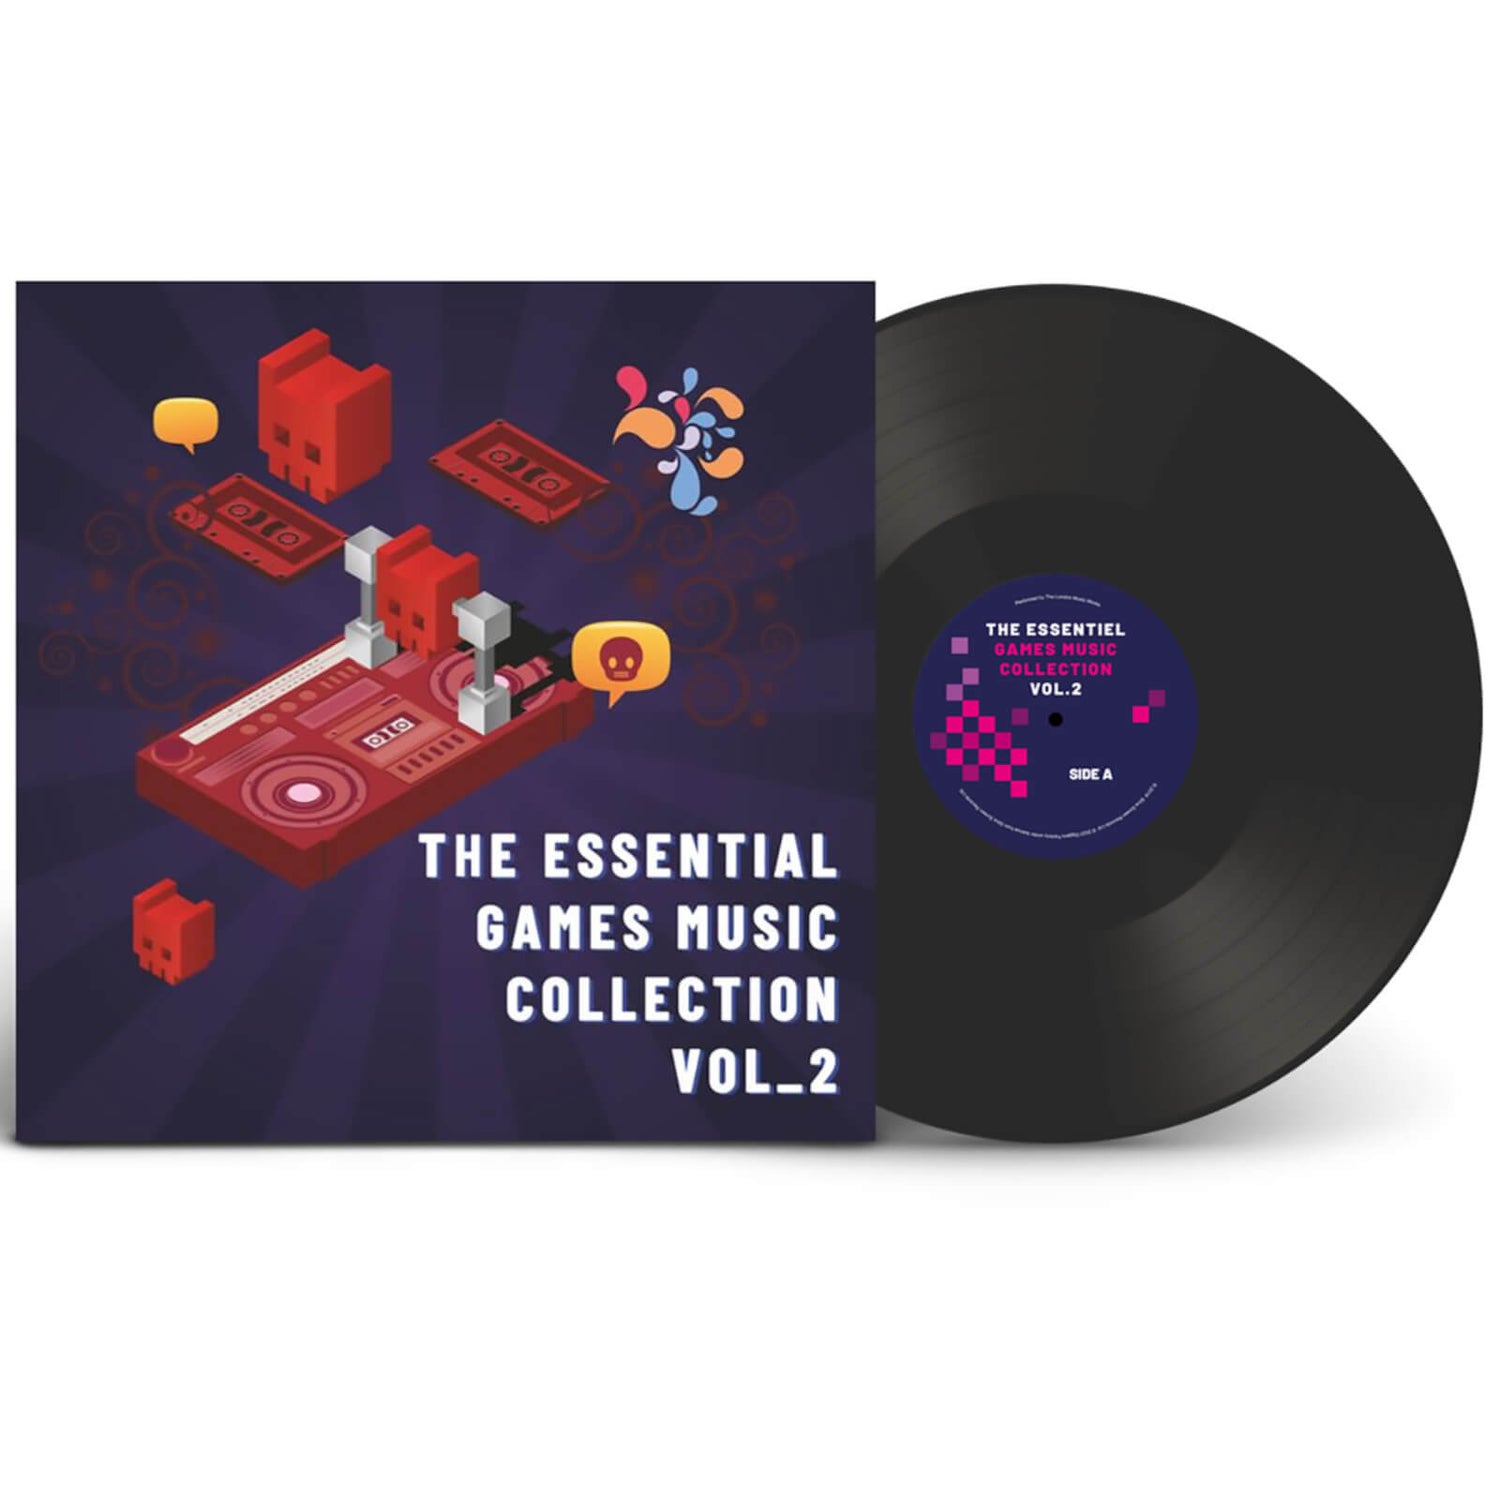 Diggers Factory The Essential Games Music Collection Vol. 2 Vinyl